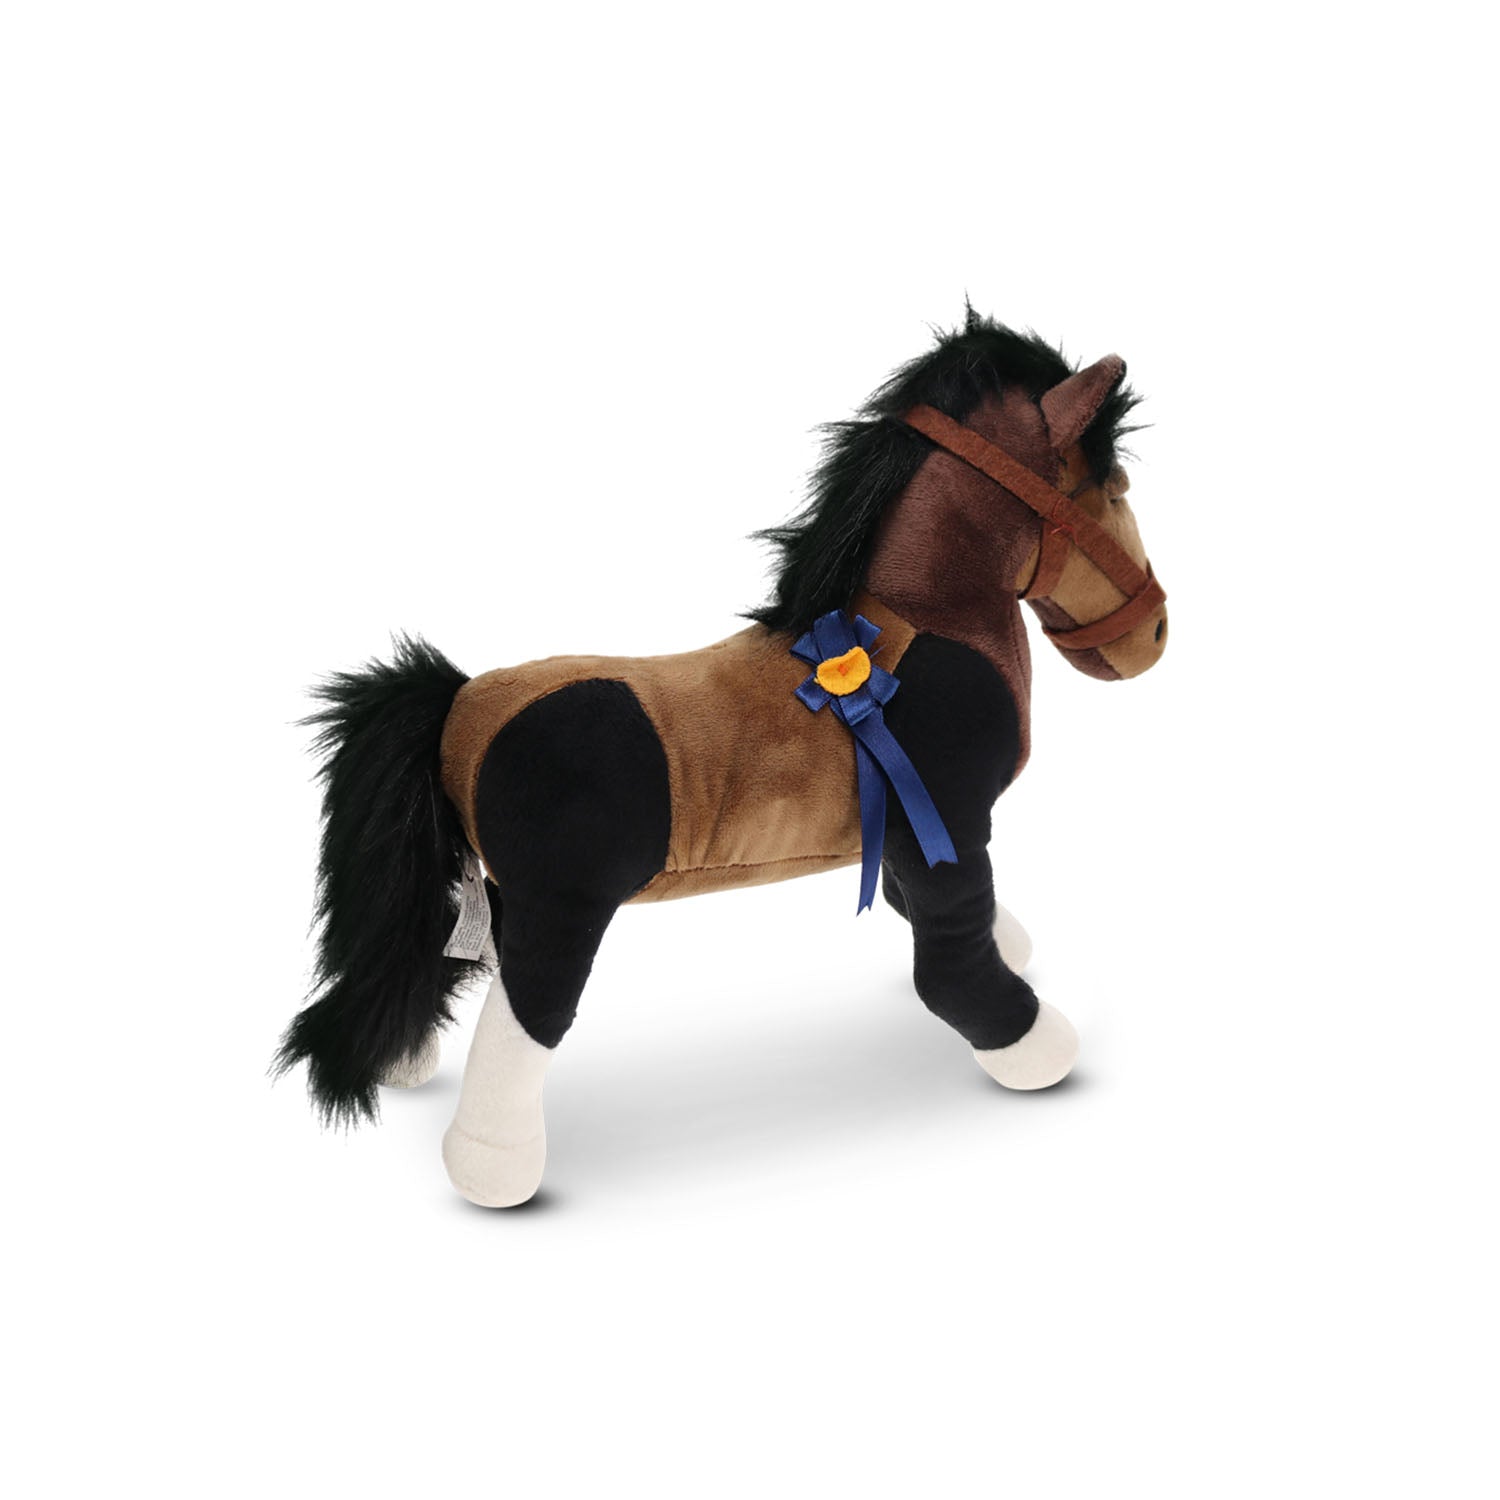 PRCA Grated Coconut Plush Horse - Angled Right Side View